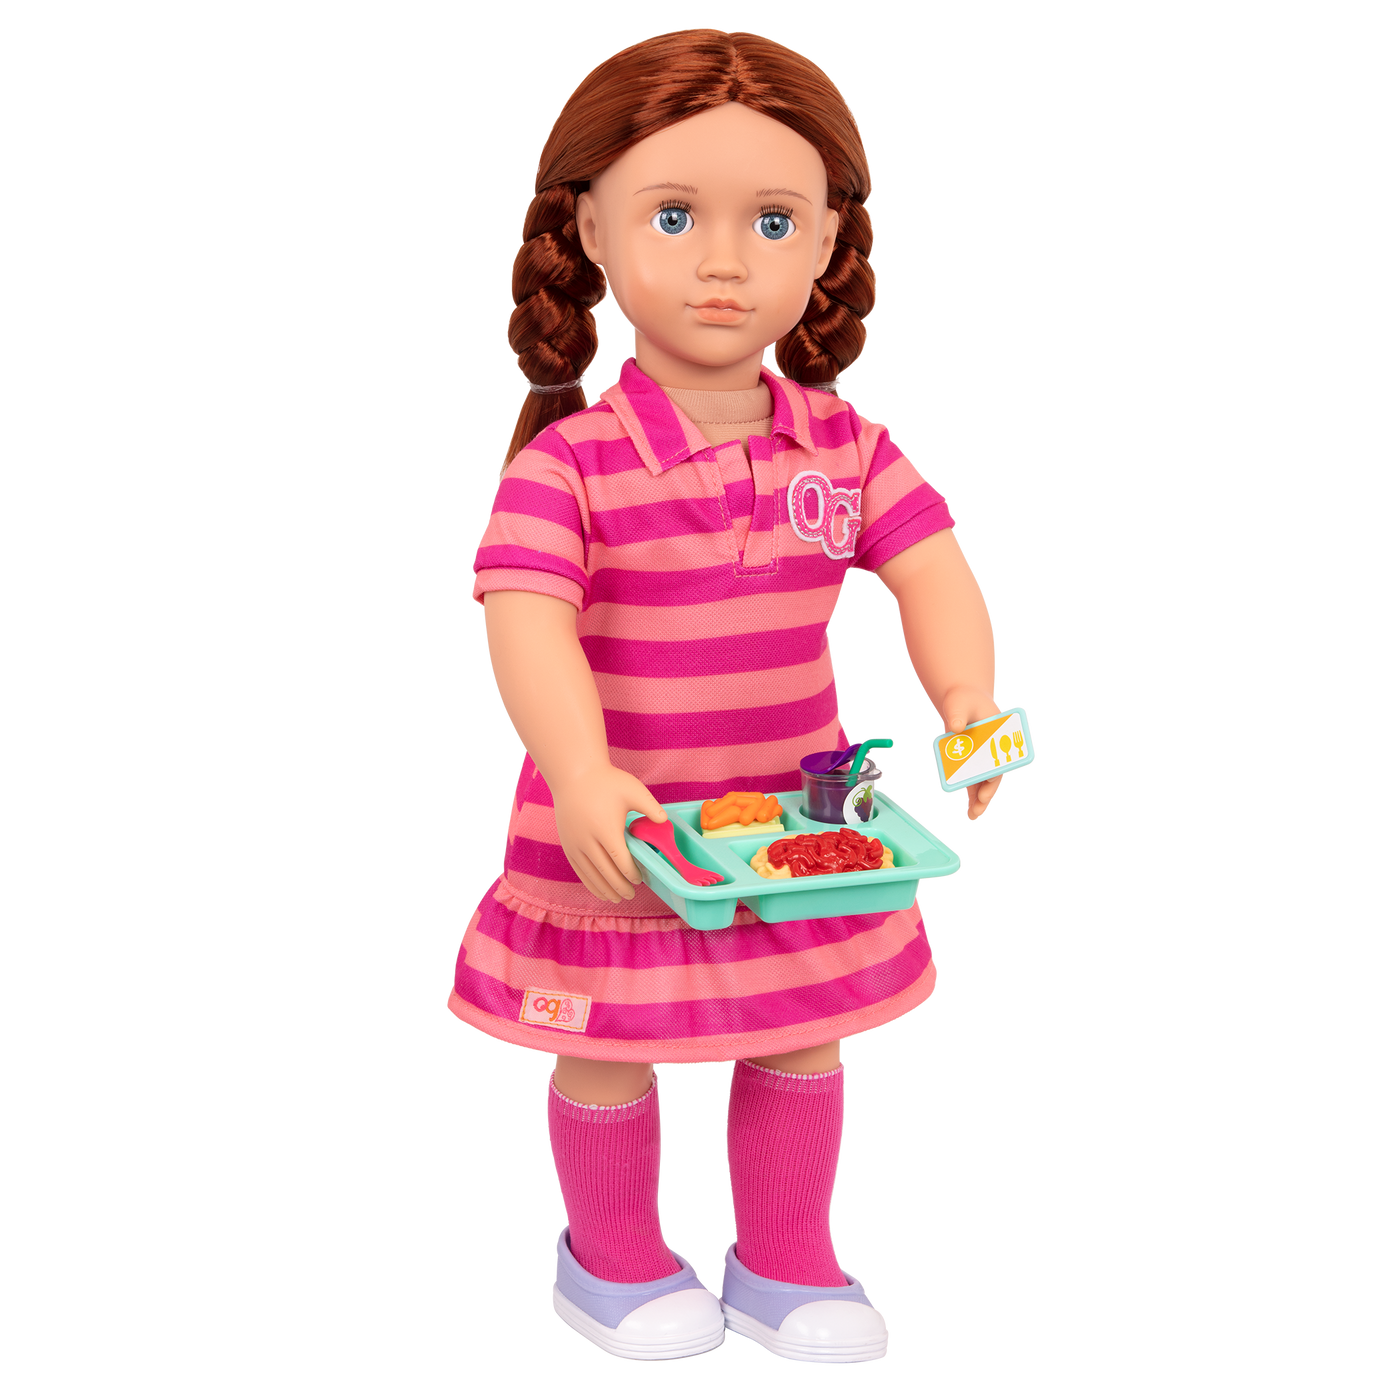 Lunch Time Fun Time School Set for 18-inch Dolls